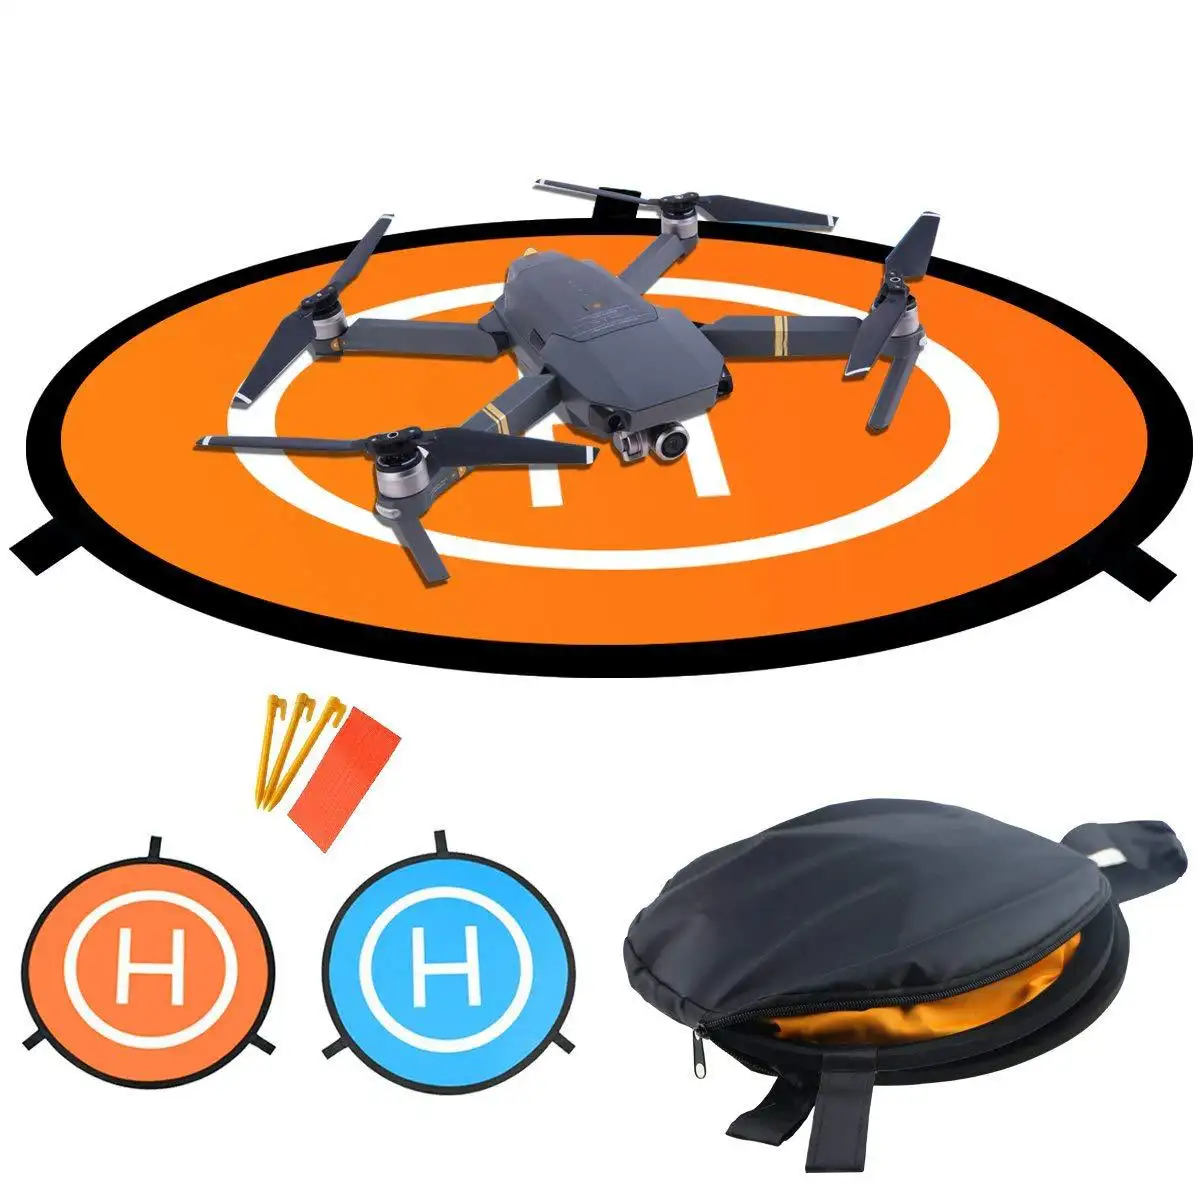 Drones Landing Pad Universal Waterproof Portable Foldable Landing Pads for RC Drones Helicopter, PVB Drones, DJI Mavic Pro